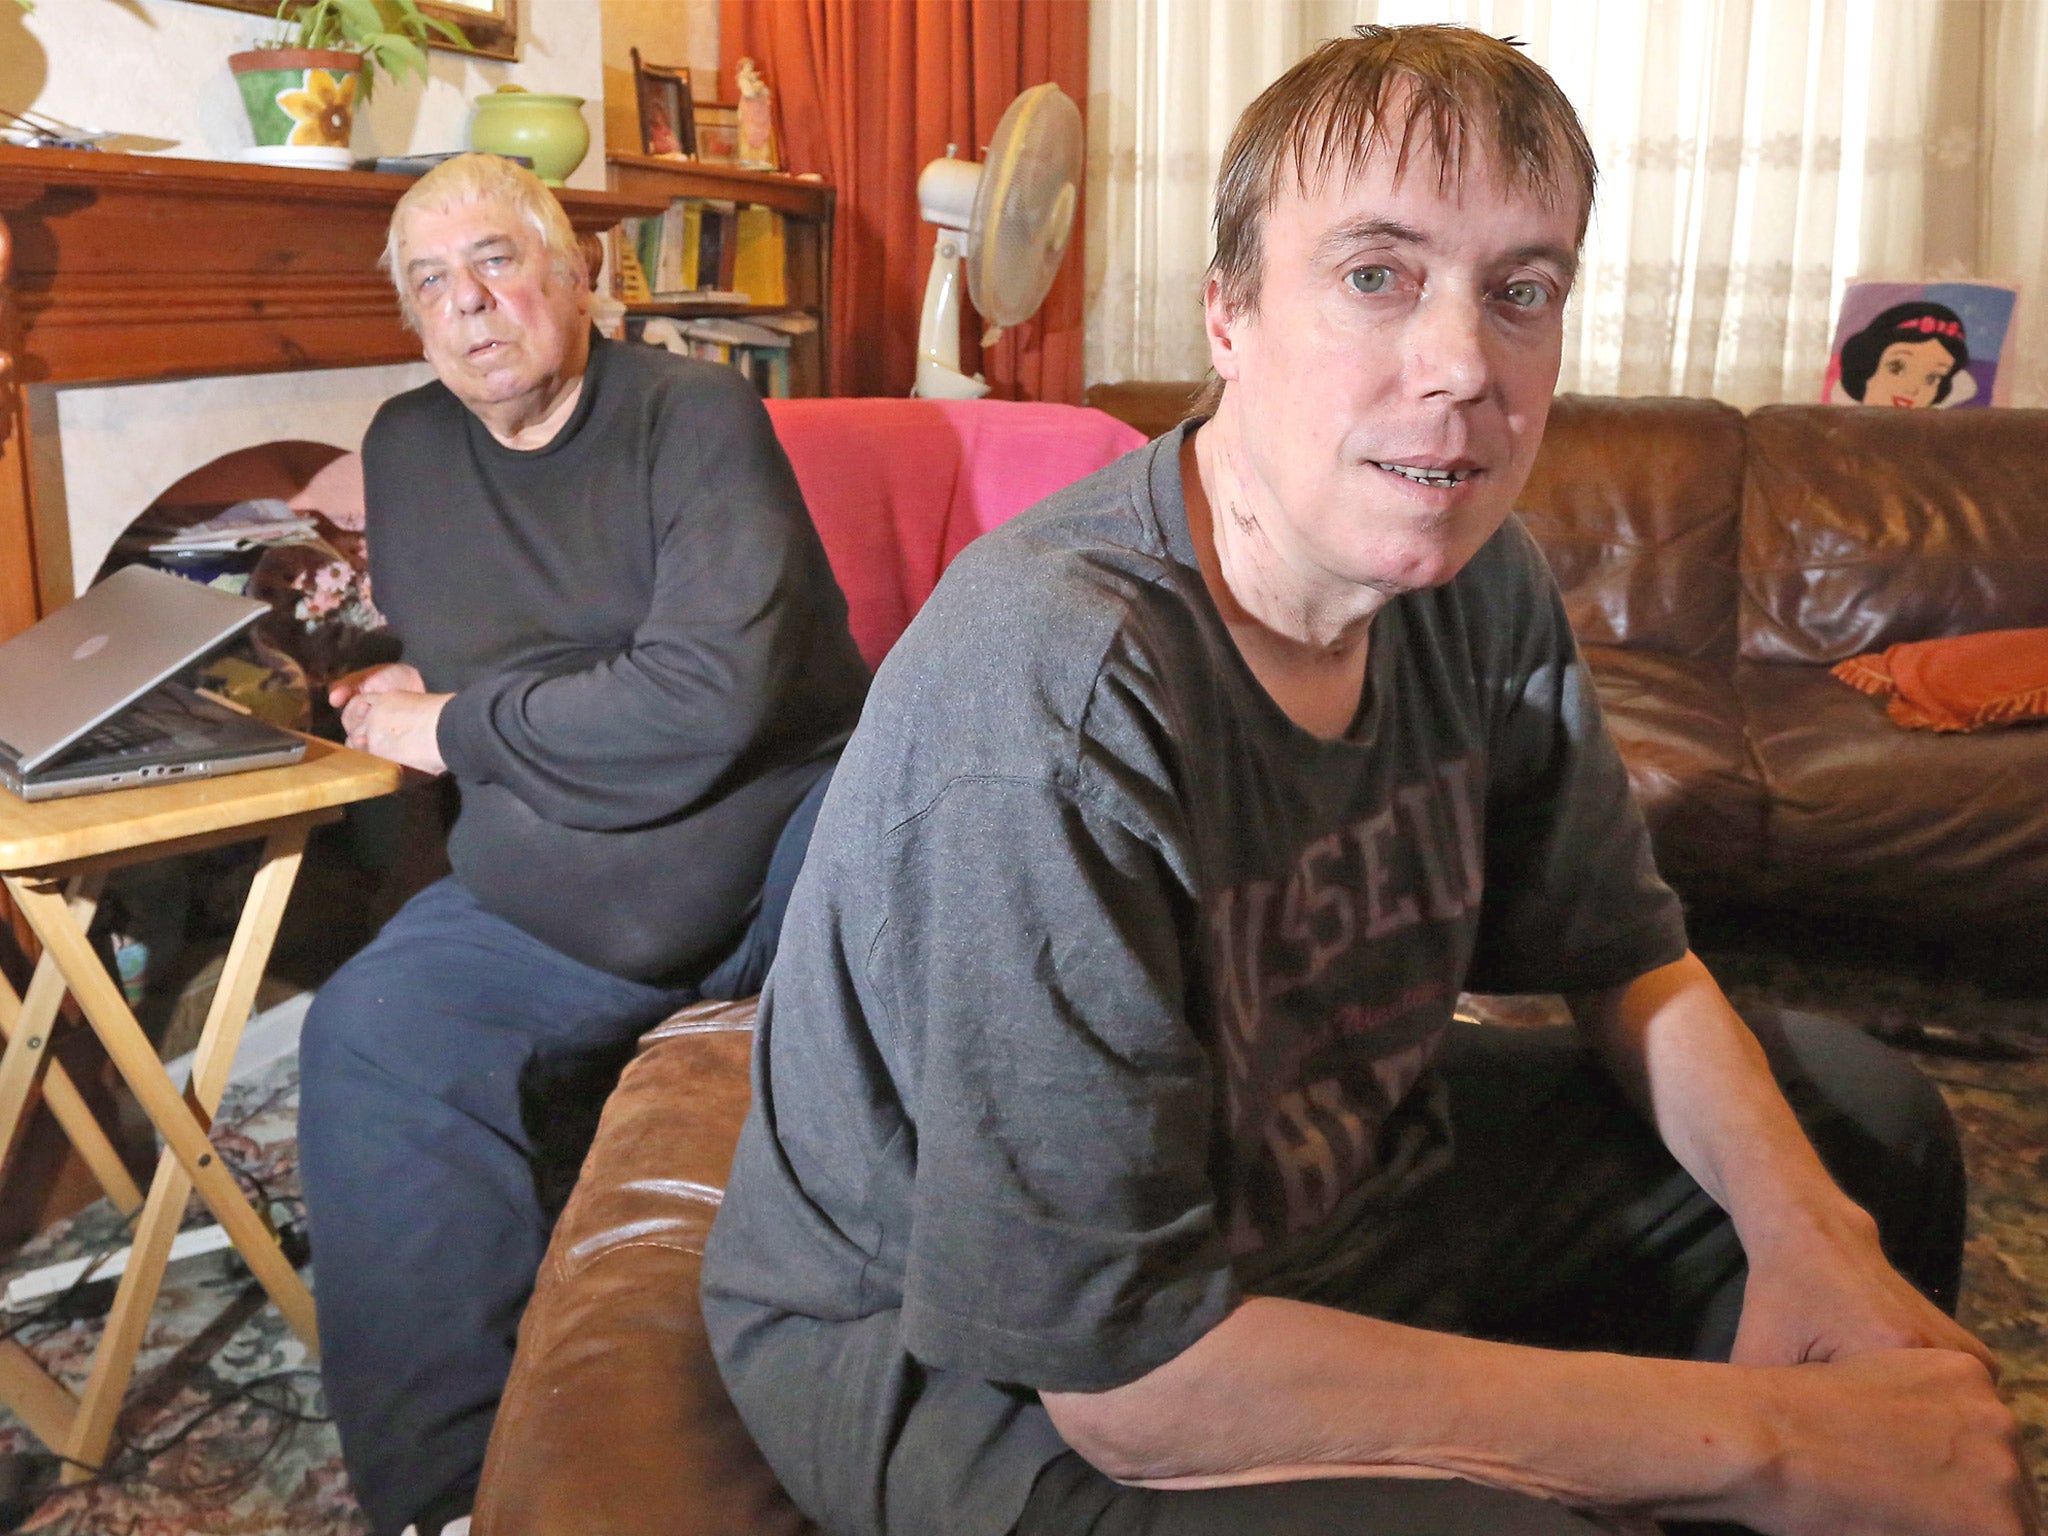 Paranoid schizophrenic Lloyd Drew at home with his father, Ray